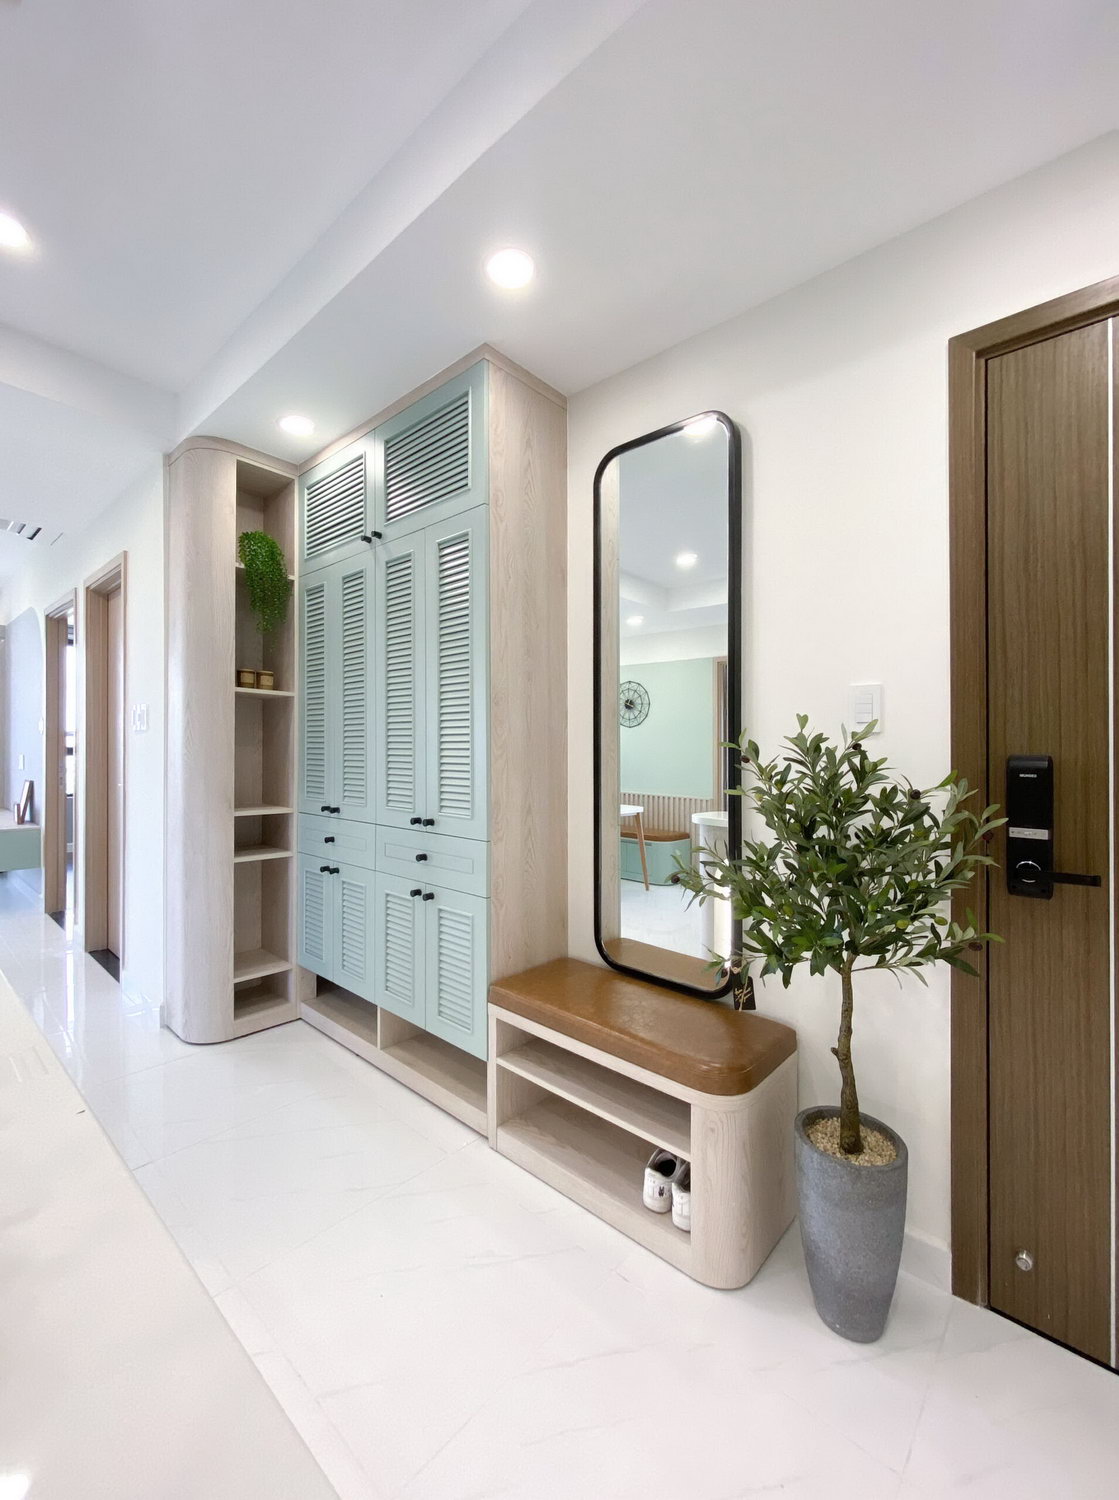 At the entrance, architects designed a shoe cabinet and a mirror to accommodate the family's living needs.